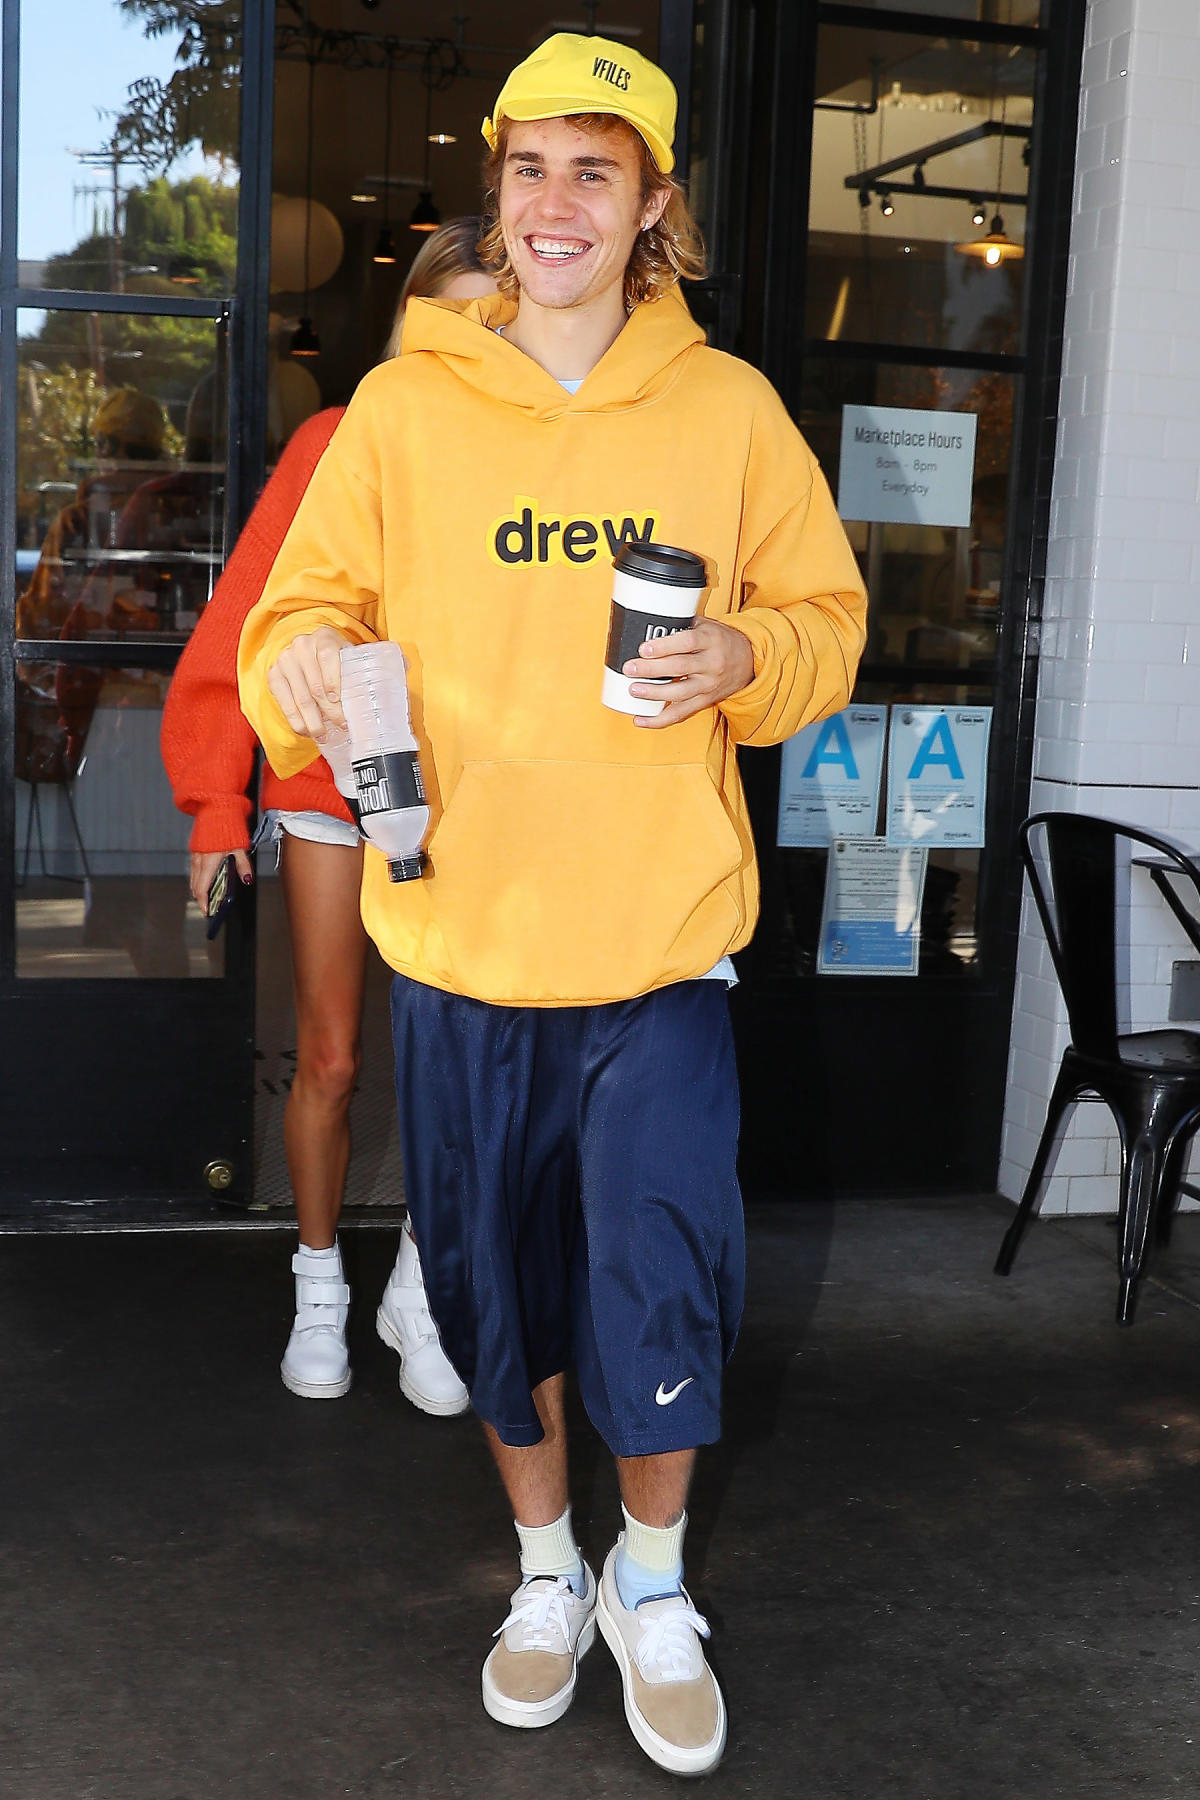 Justin Bieber Officially Launches His 'Drew' Clothing Line: 'Wear 